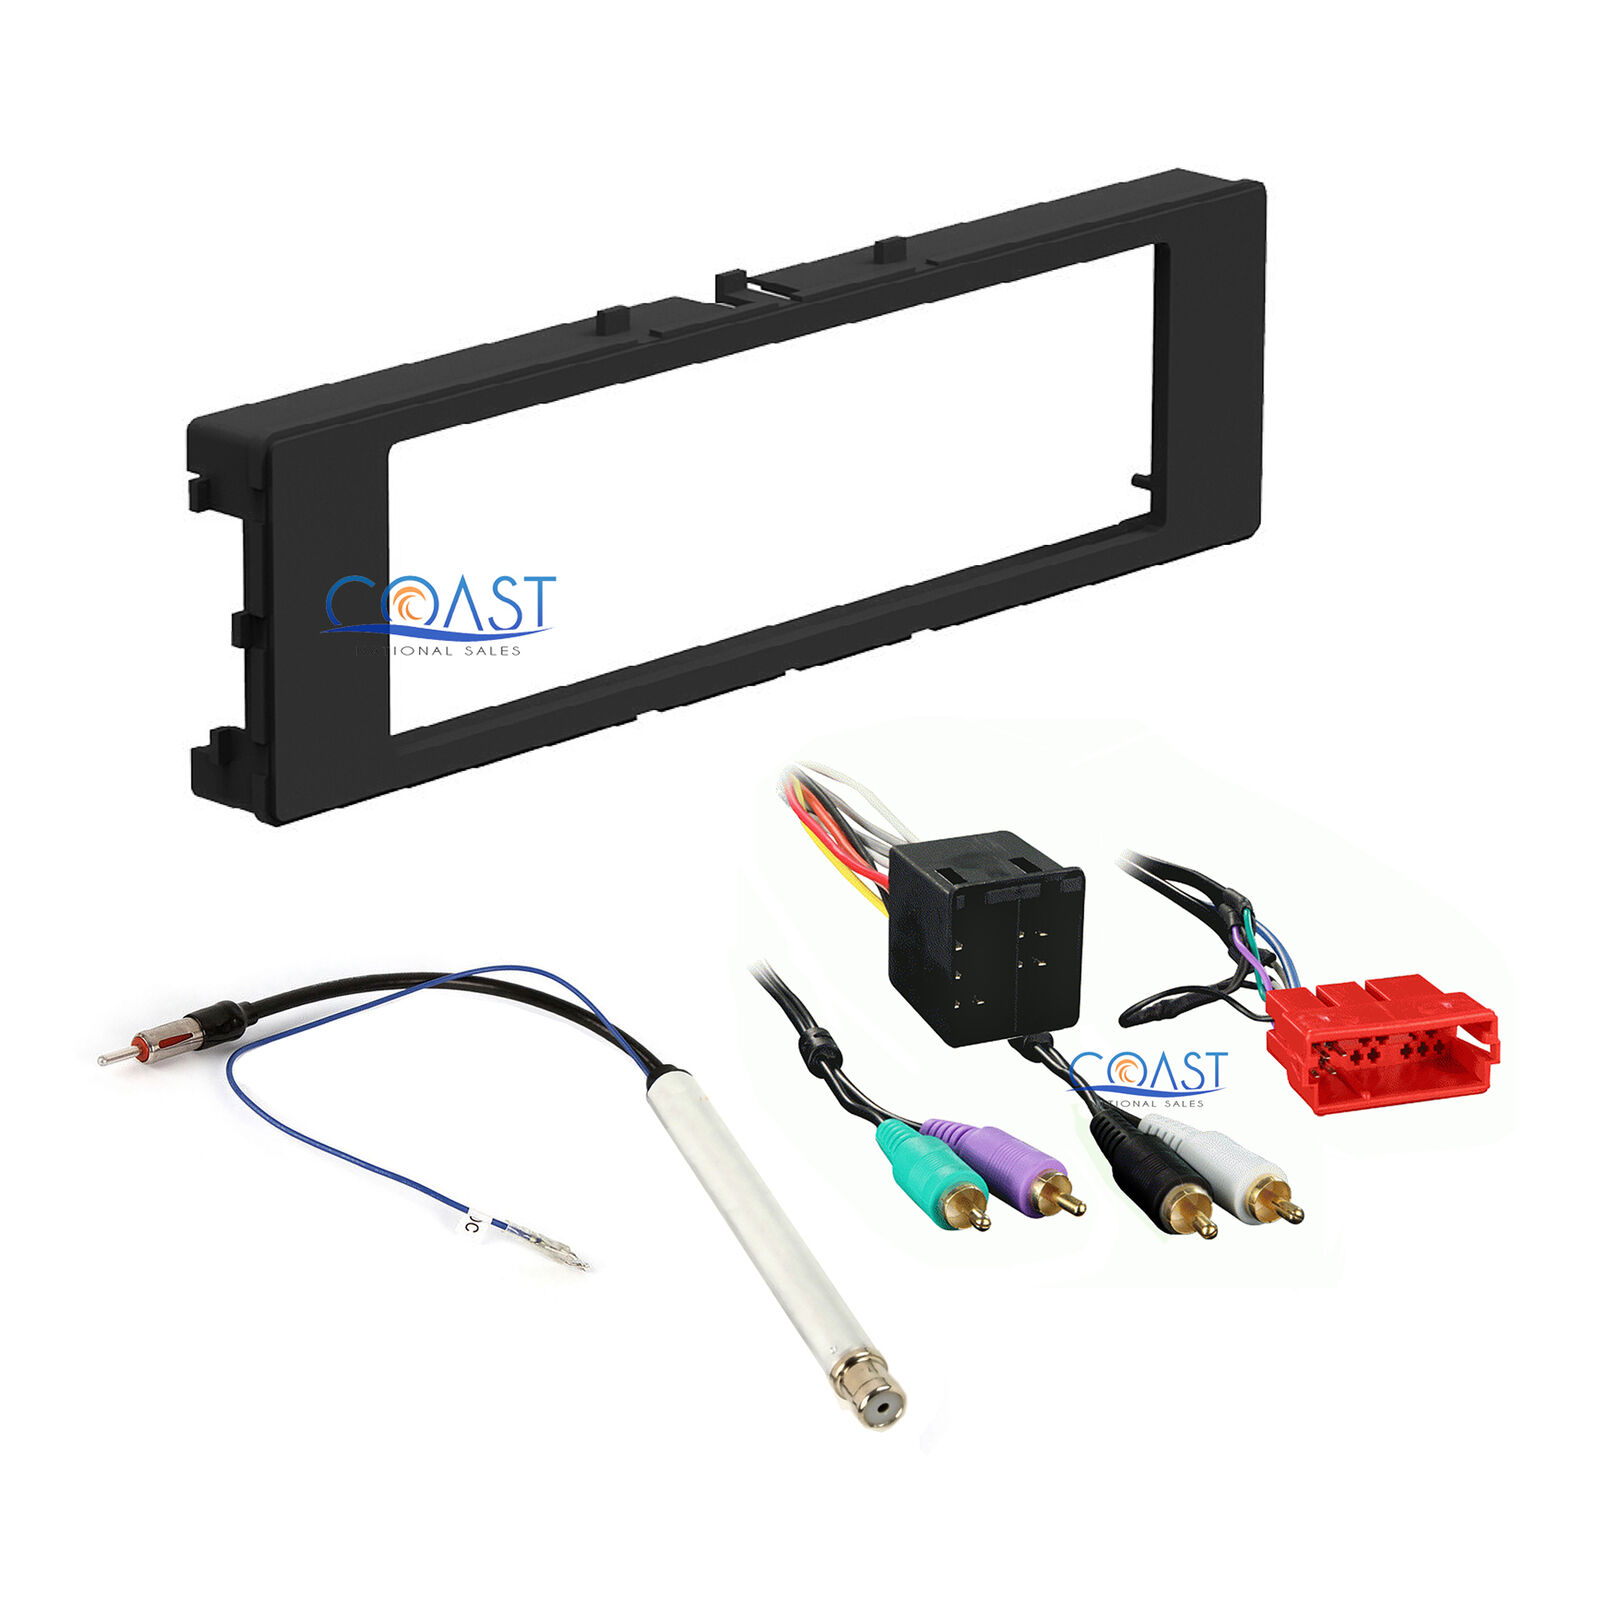 Single DIN Stereo Dash Kit w/ Harness Antenna for 1996-2006 Audi A4 A6 A8 TT 